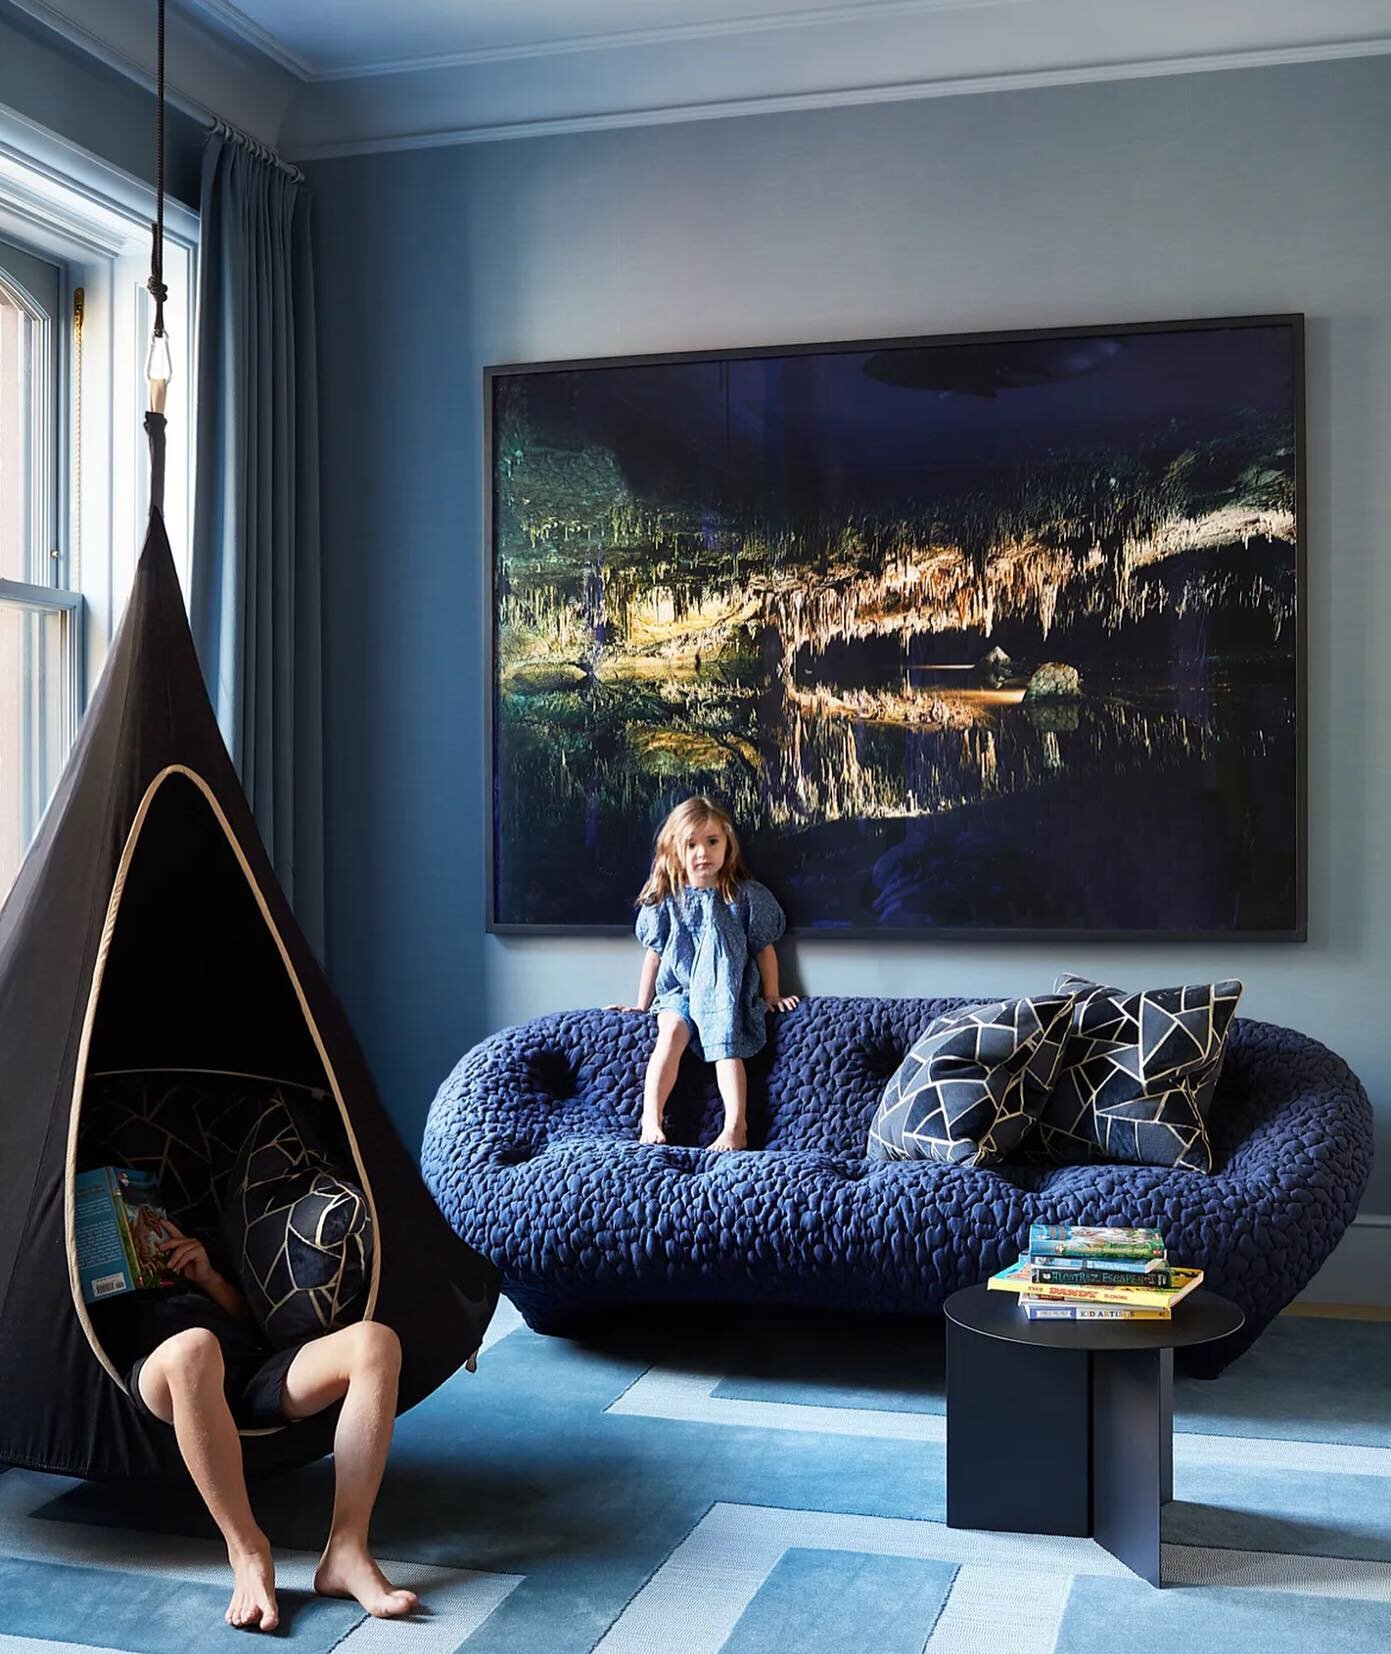 Moody and fun inspo for a new kids room we're working on via @alisa_bloom and @archdigest. We love a hanging chair (so do the small clients 🤗) and a nubby fabric to hang on. Plus the pallete is not quite the blue you'd expect and provides some runwa